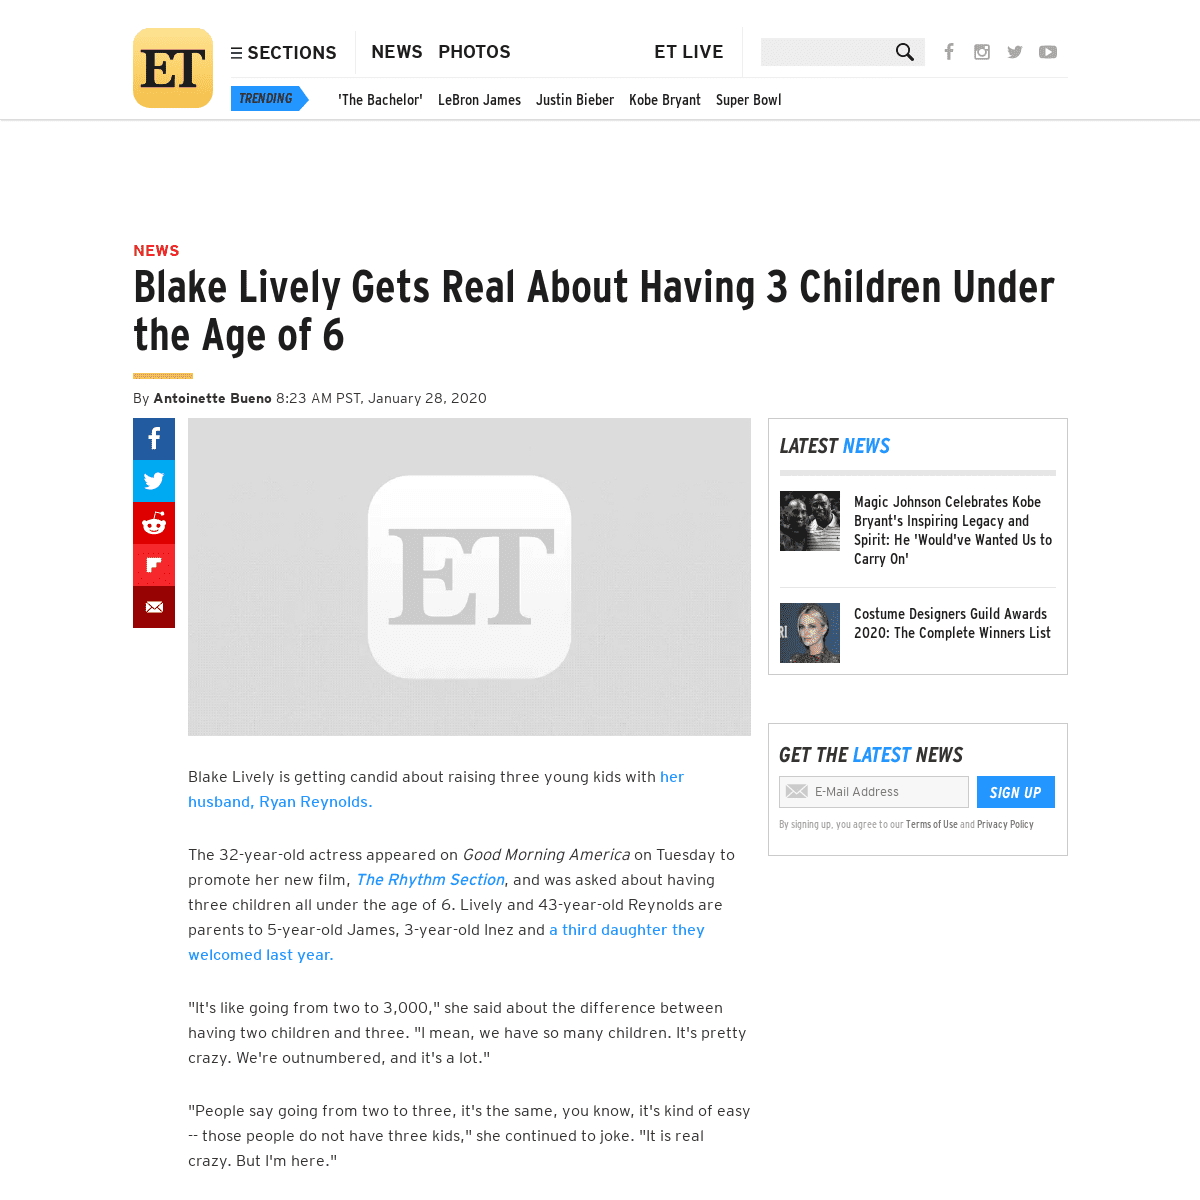 A complete backup of www.etonline.com/blake-lively-gets-real-about-having-3-children-under-the-age-of-6-140456